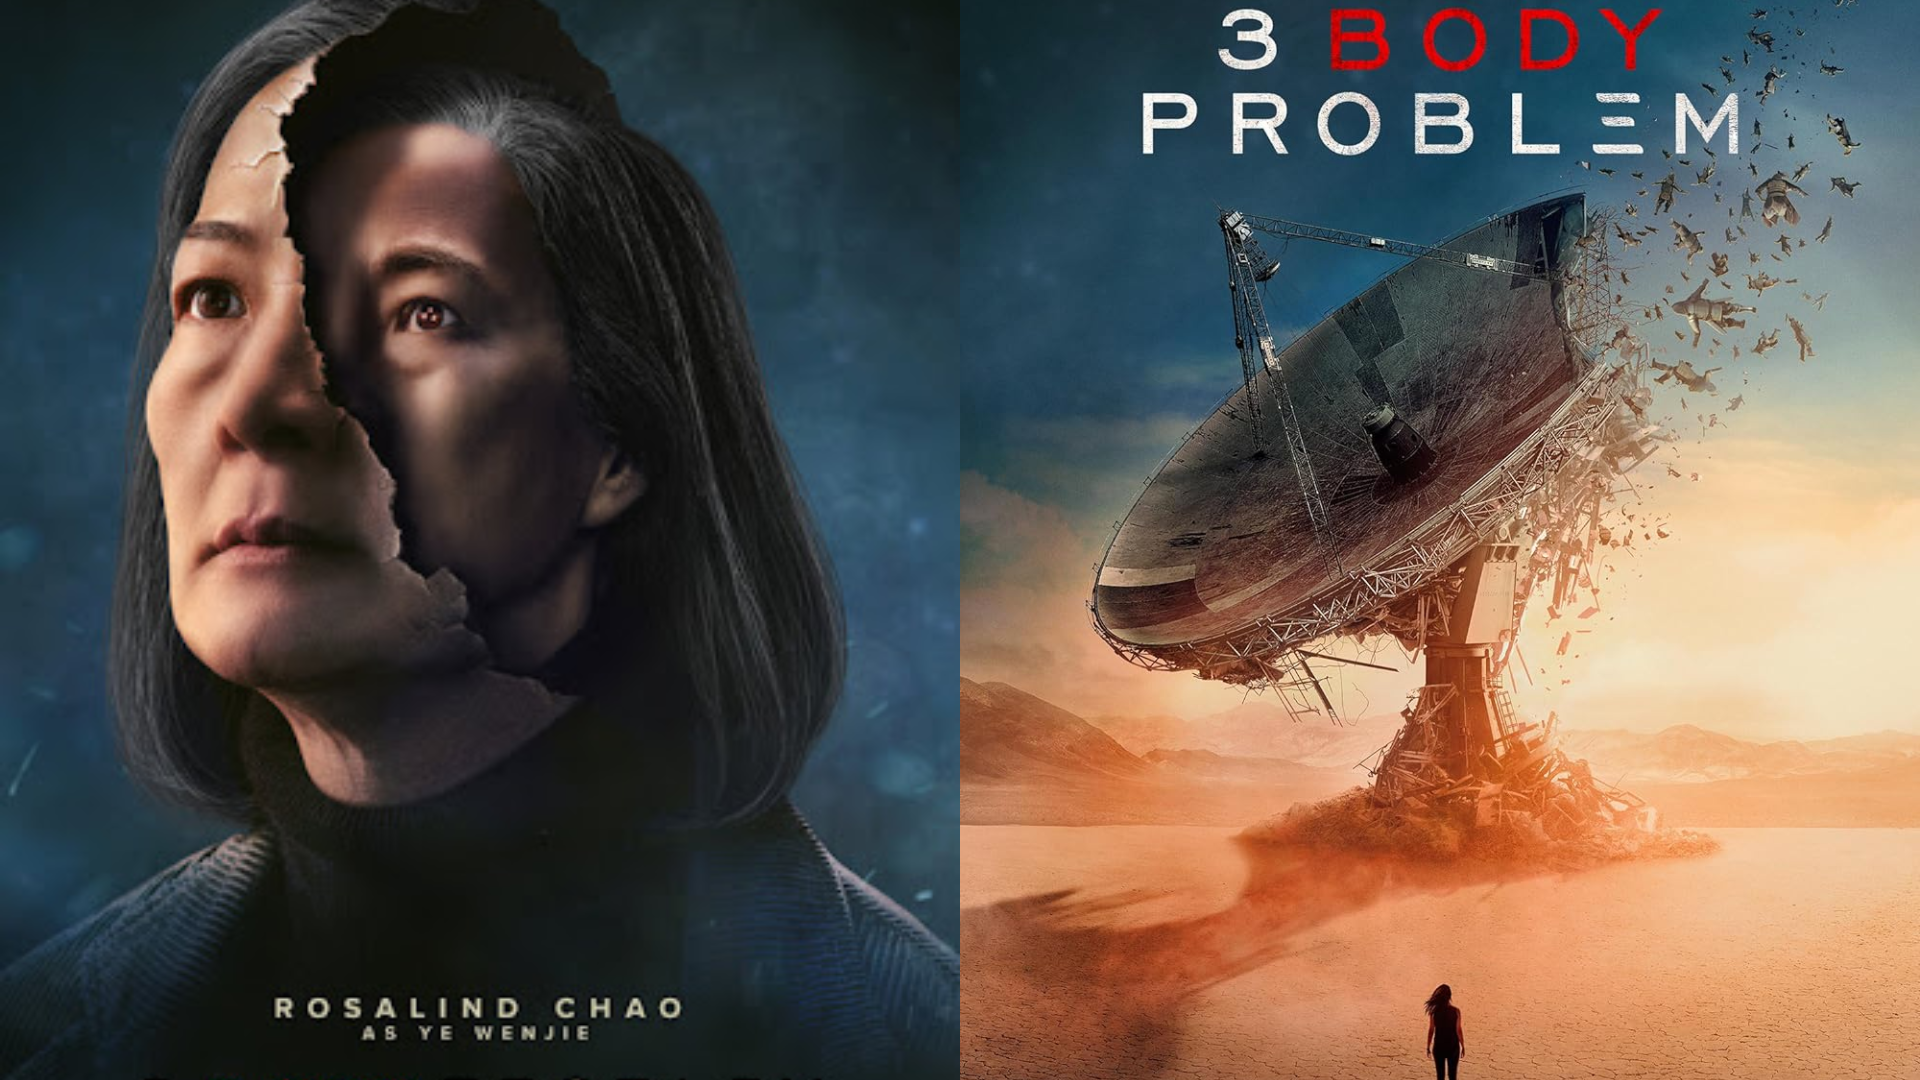 Netflix’s ‘3 Body Problem’ Gets Slammed By Chinese Media For Showing Them As Villains And Promoting American Culture Dominance